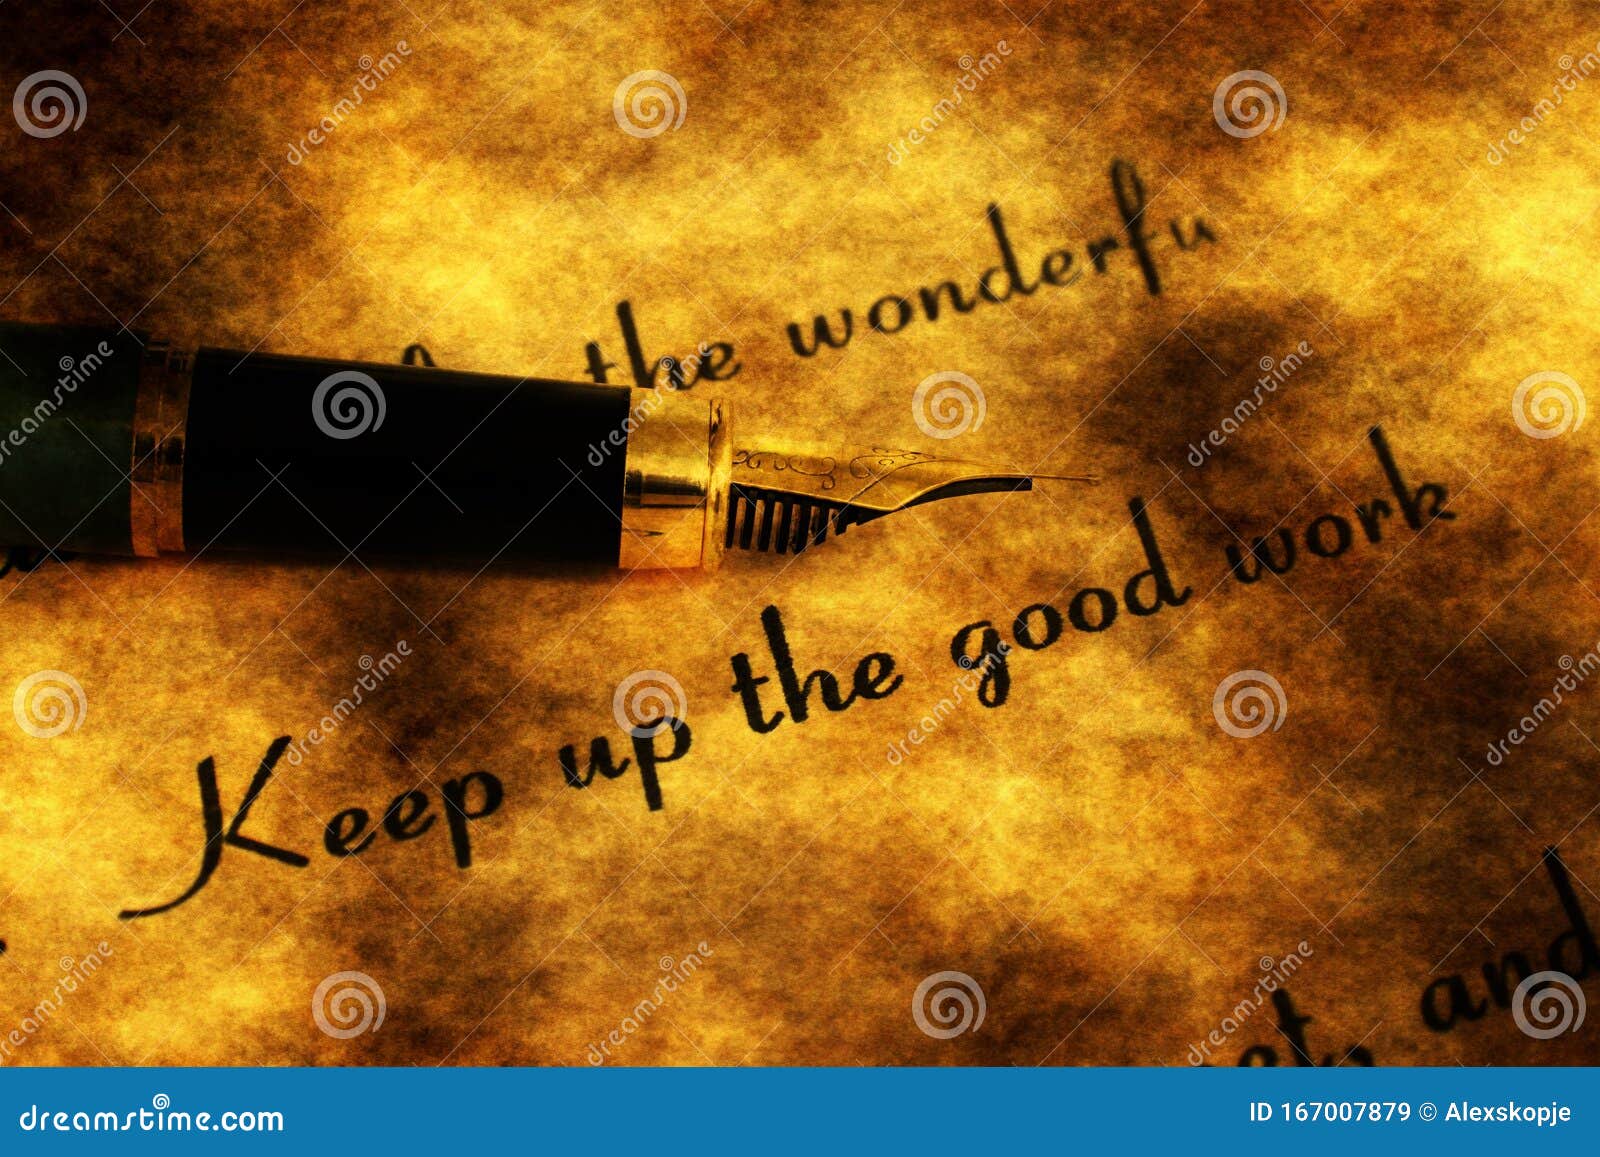 Keep up the good. Keep up the good work picture.